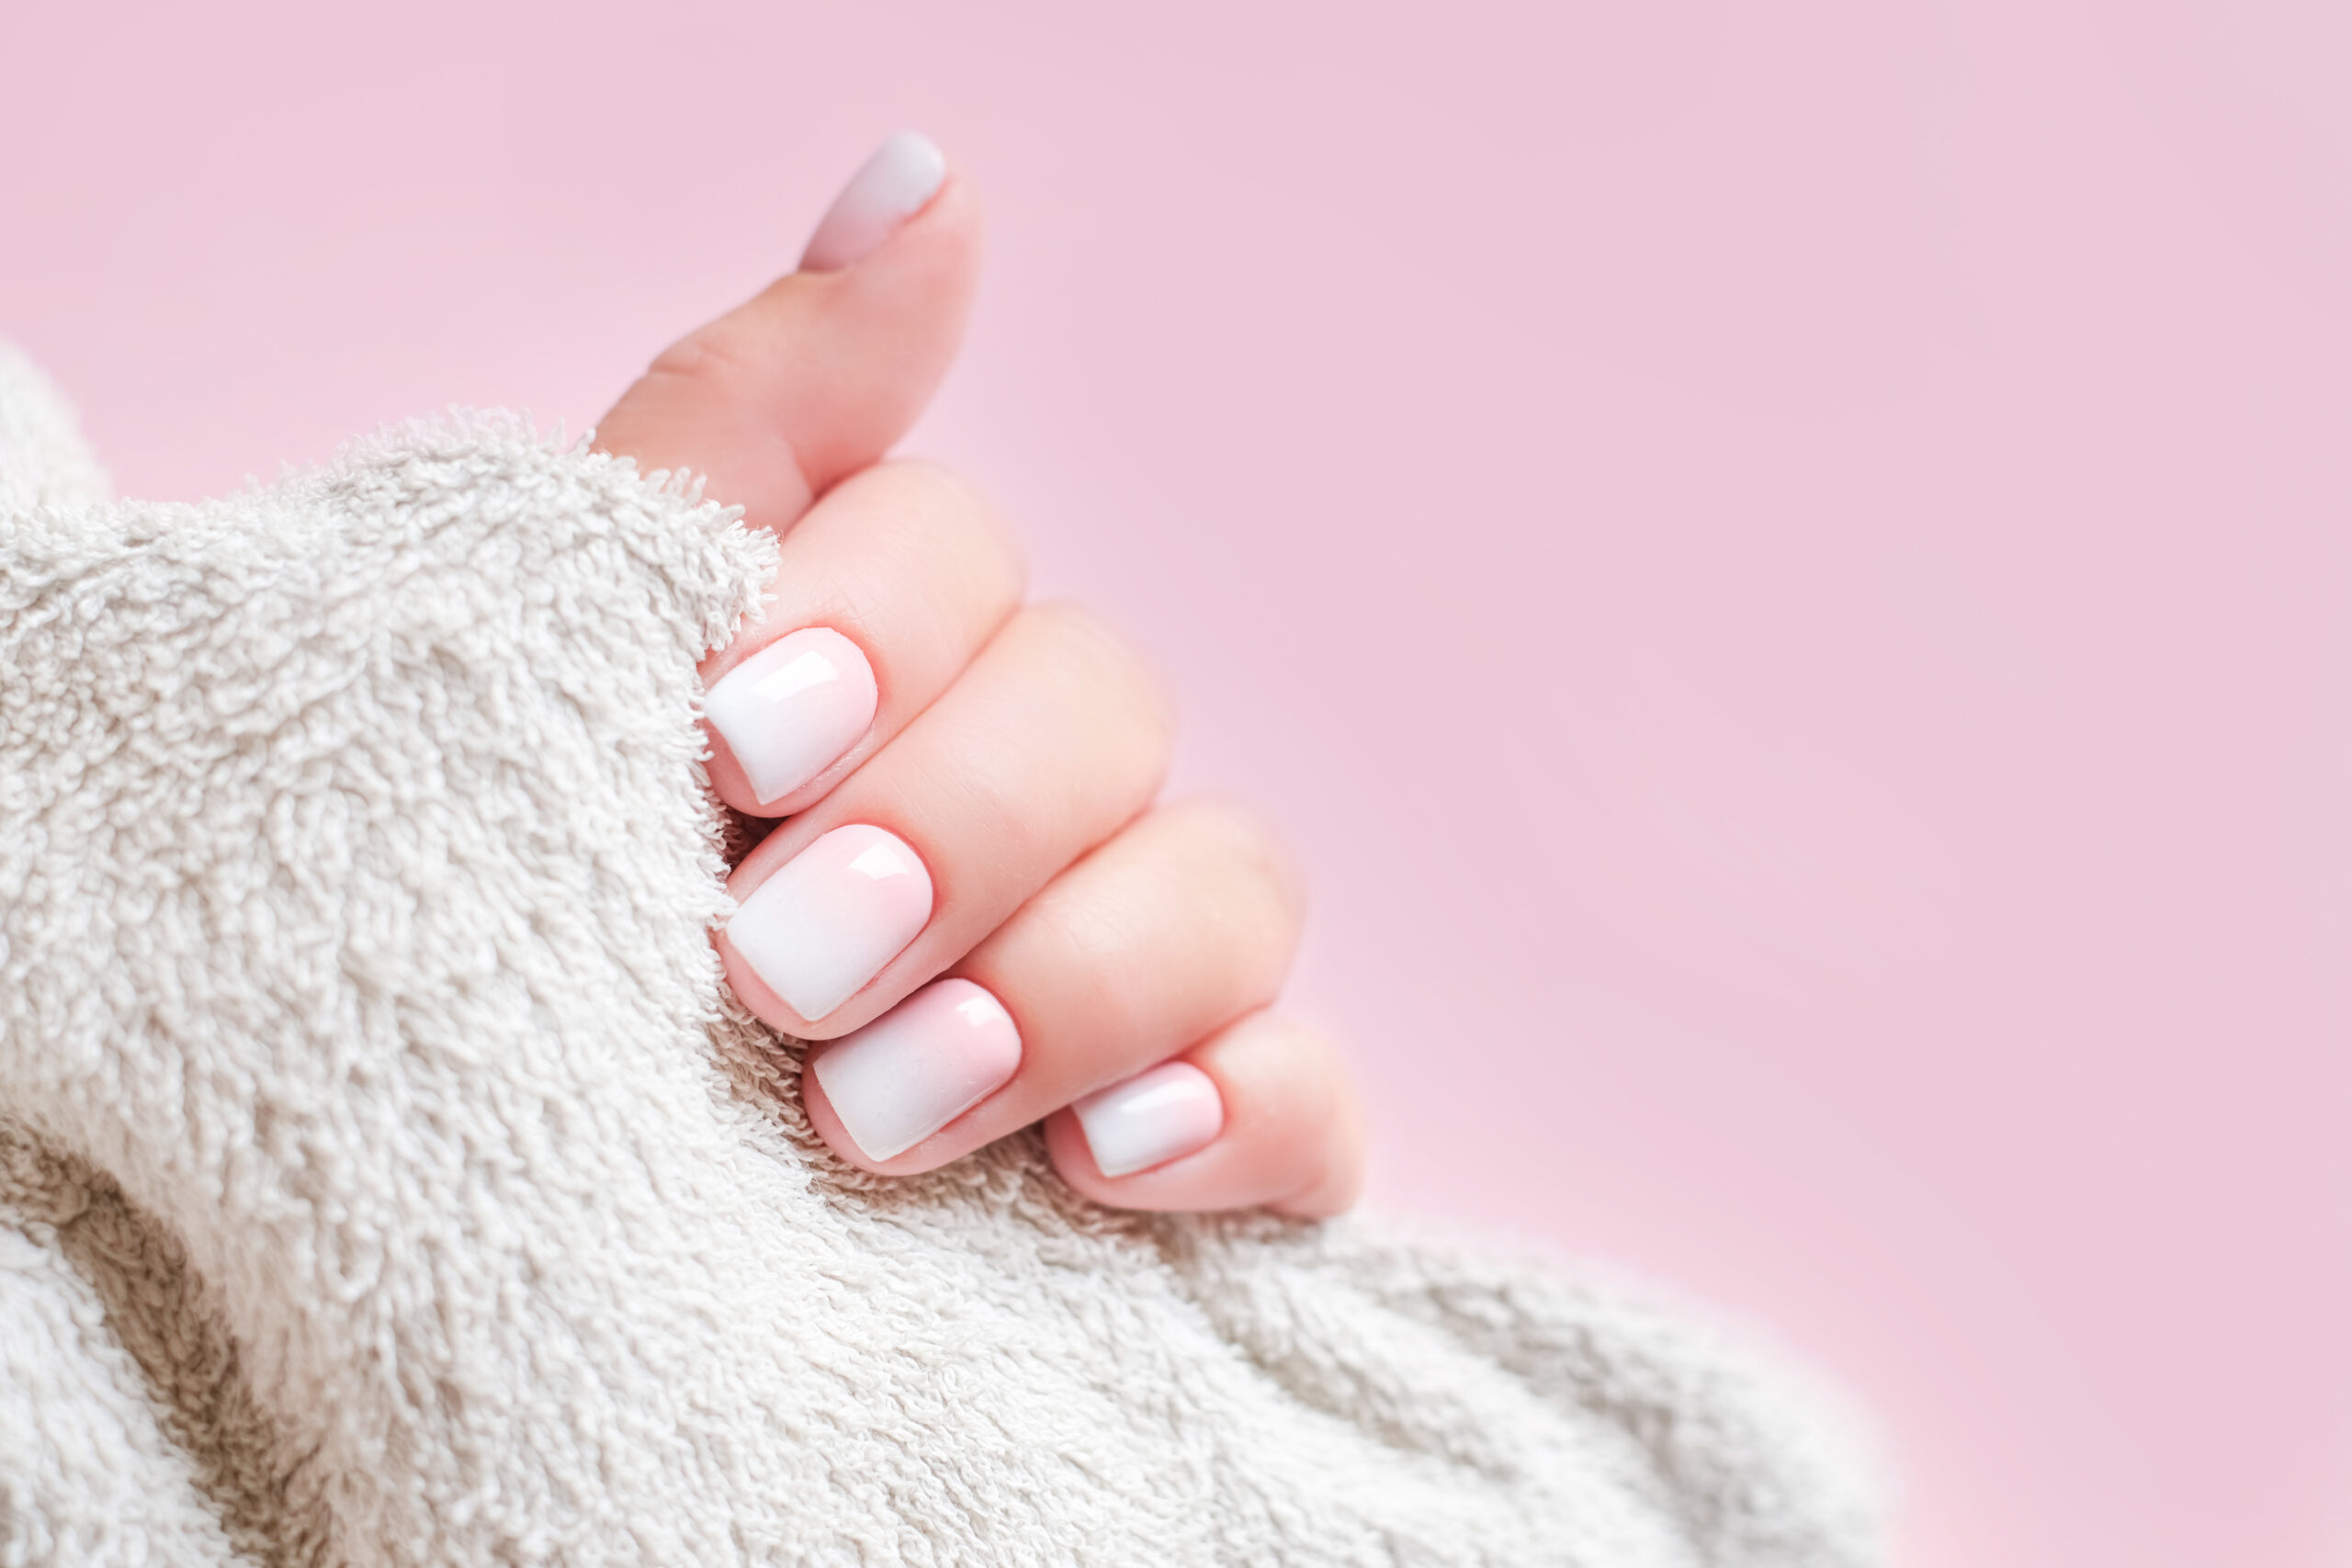 gradient-manicure-hands-spa-beautiful-woman-hand-closeup-manicured-nails-soft-hands-skin-beautiful-womans-nails-with-beautiful-baby-boomer-manicure-pink-background-copy-space